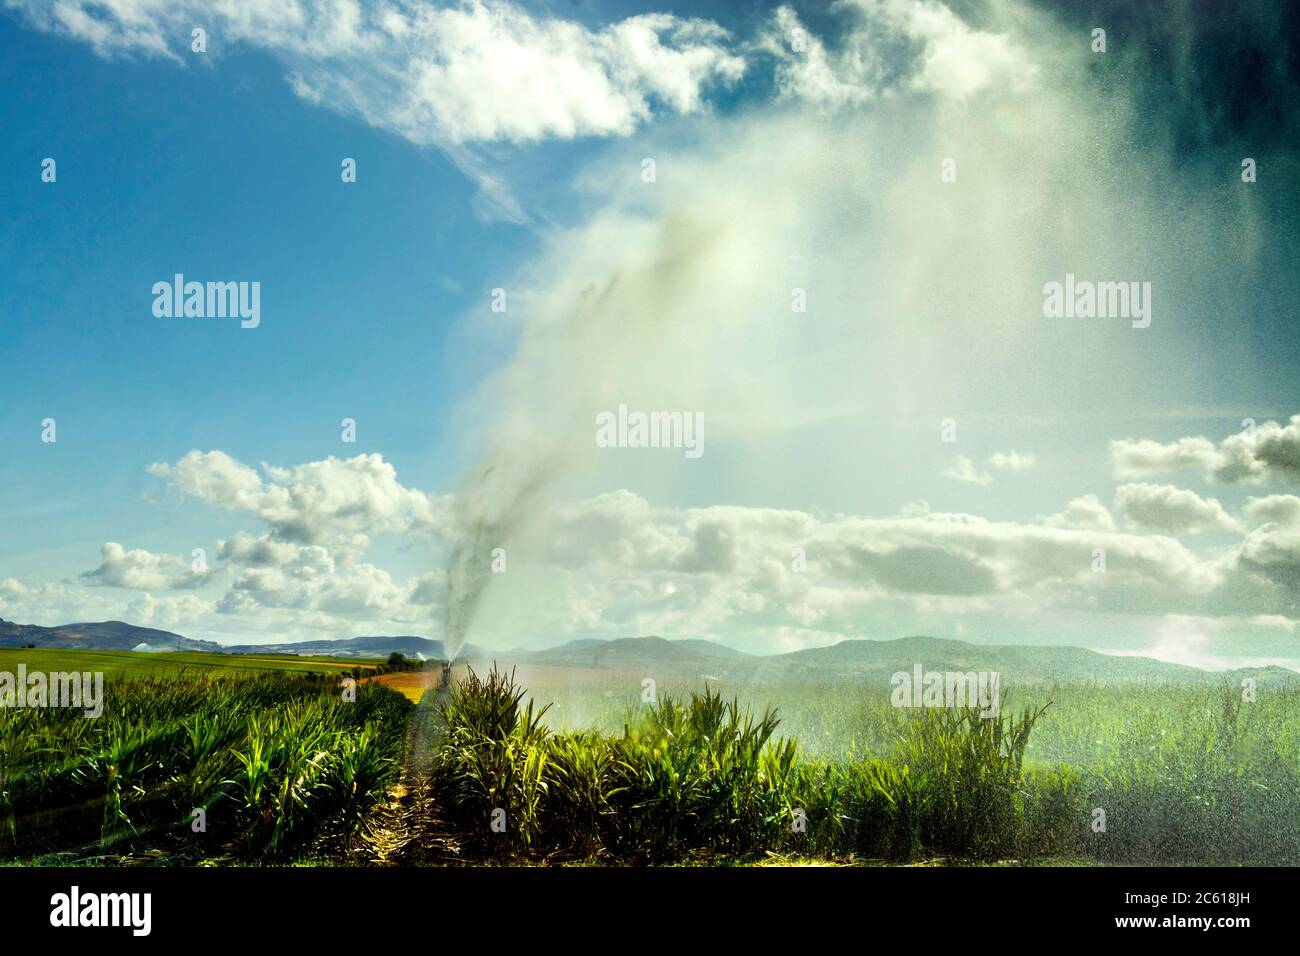 Watering system watering a field of maize, Puy de Dome depatment, Limagne plain, Auvergne Rhone Alpes,  France Stock Photo